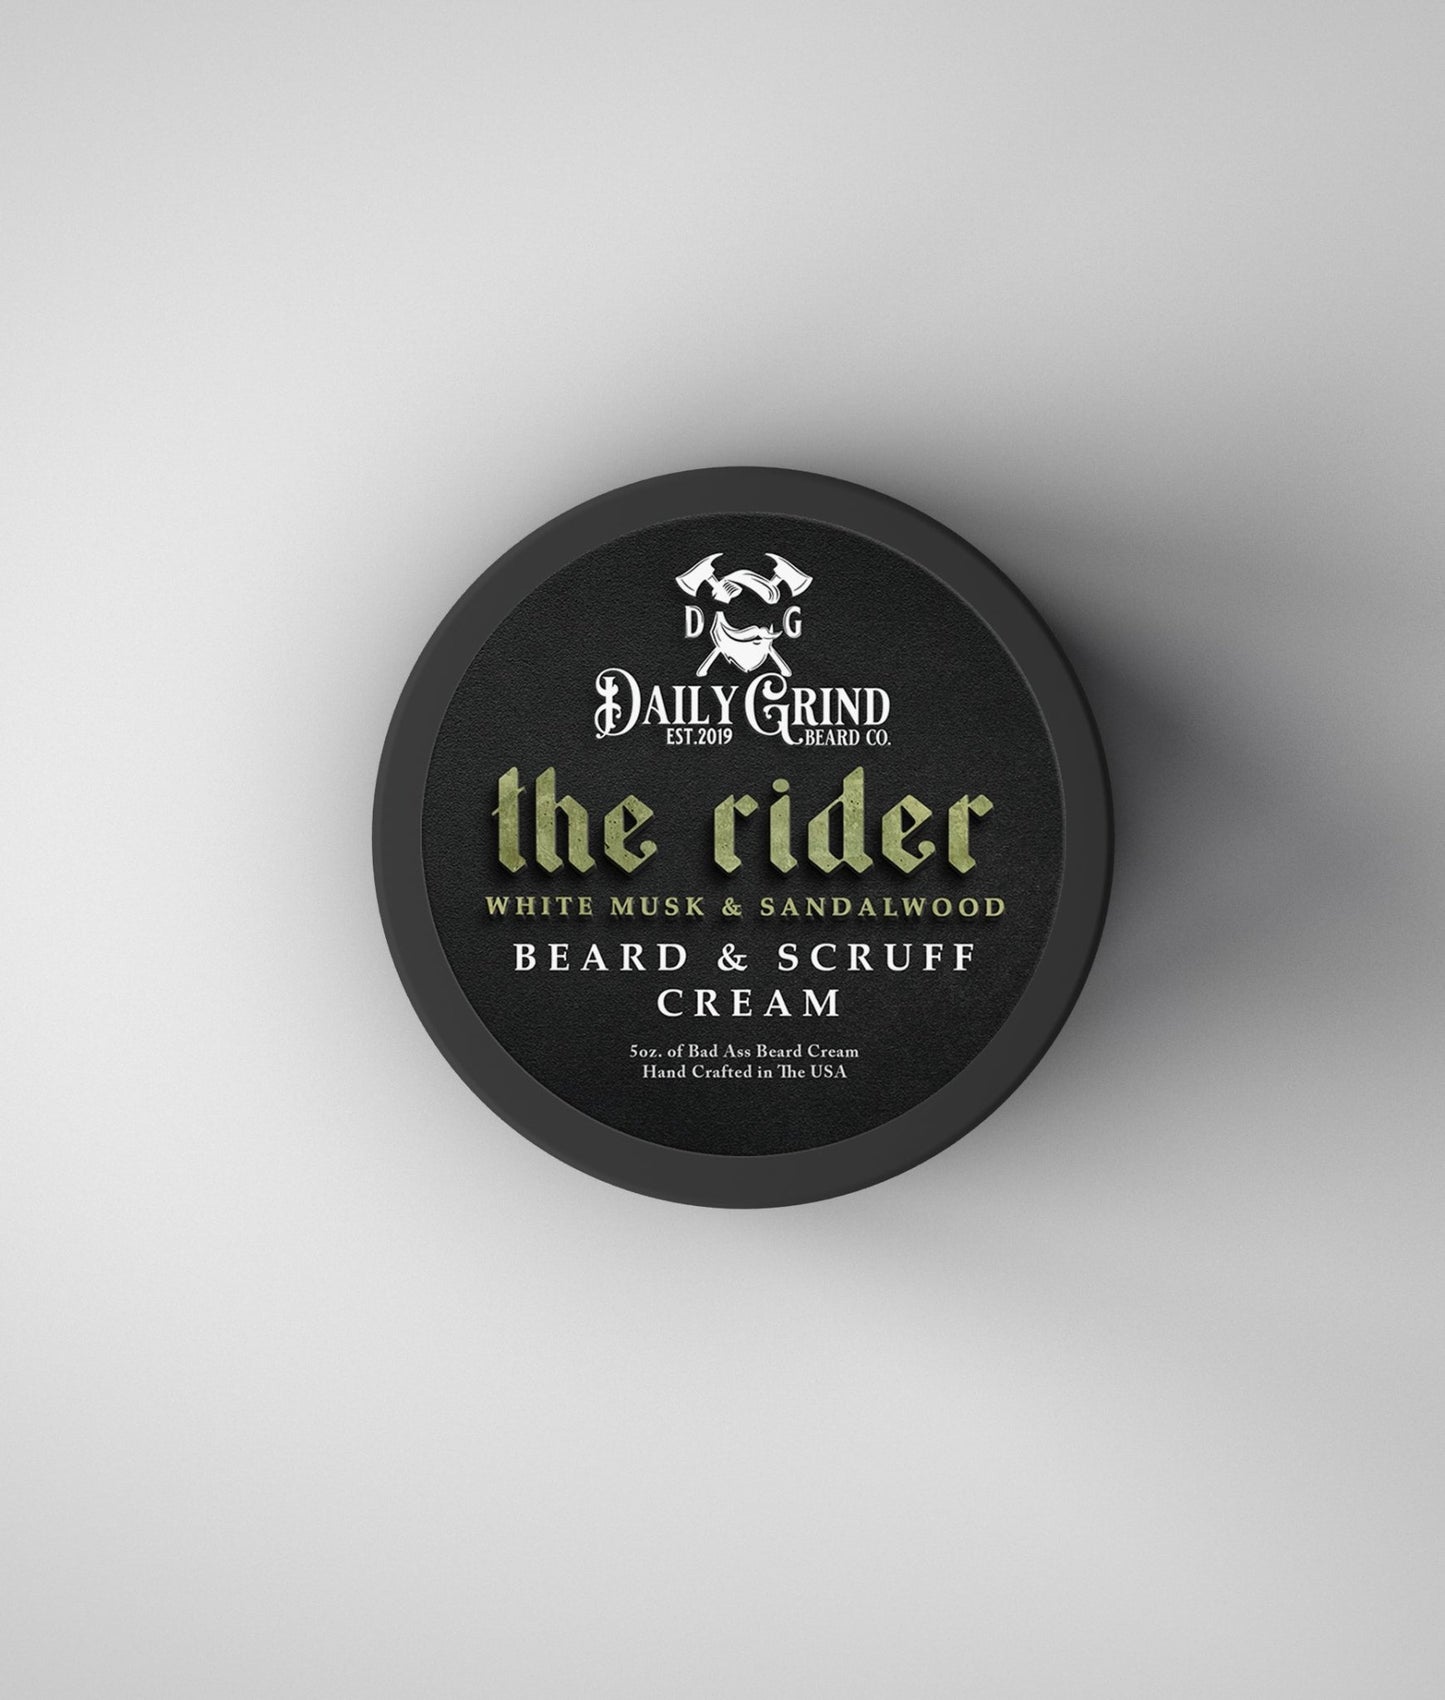 The Rider - Sweet, Floral, Musk, Beard & Scruff Cream - Daily Grind